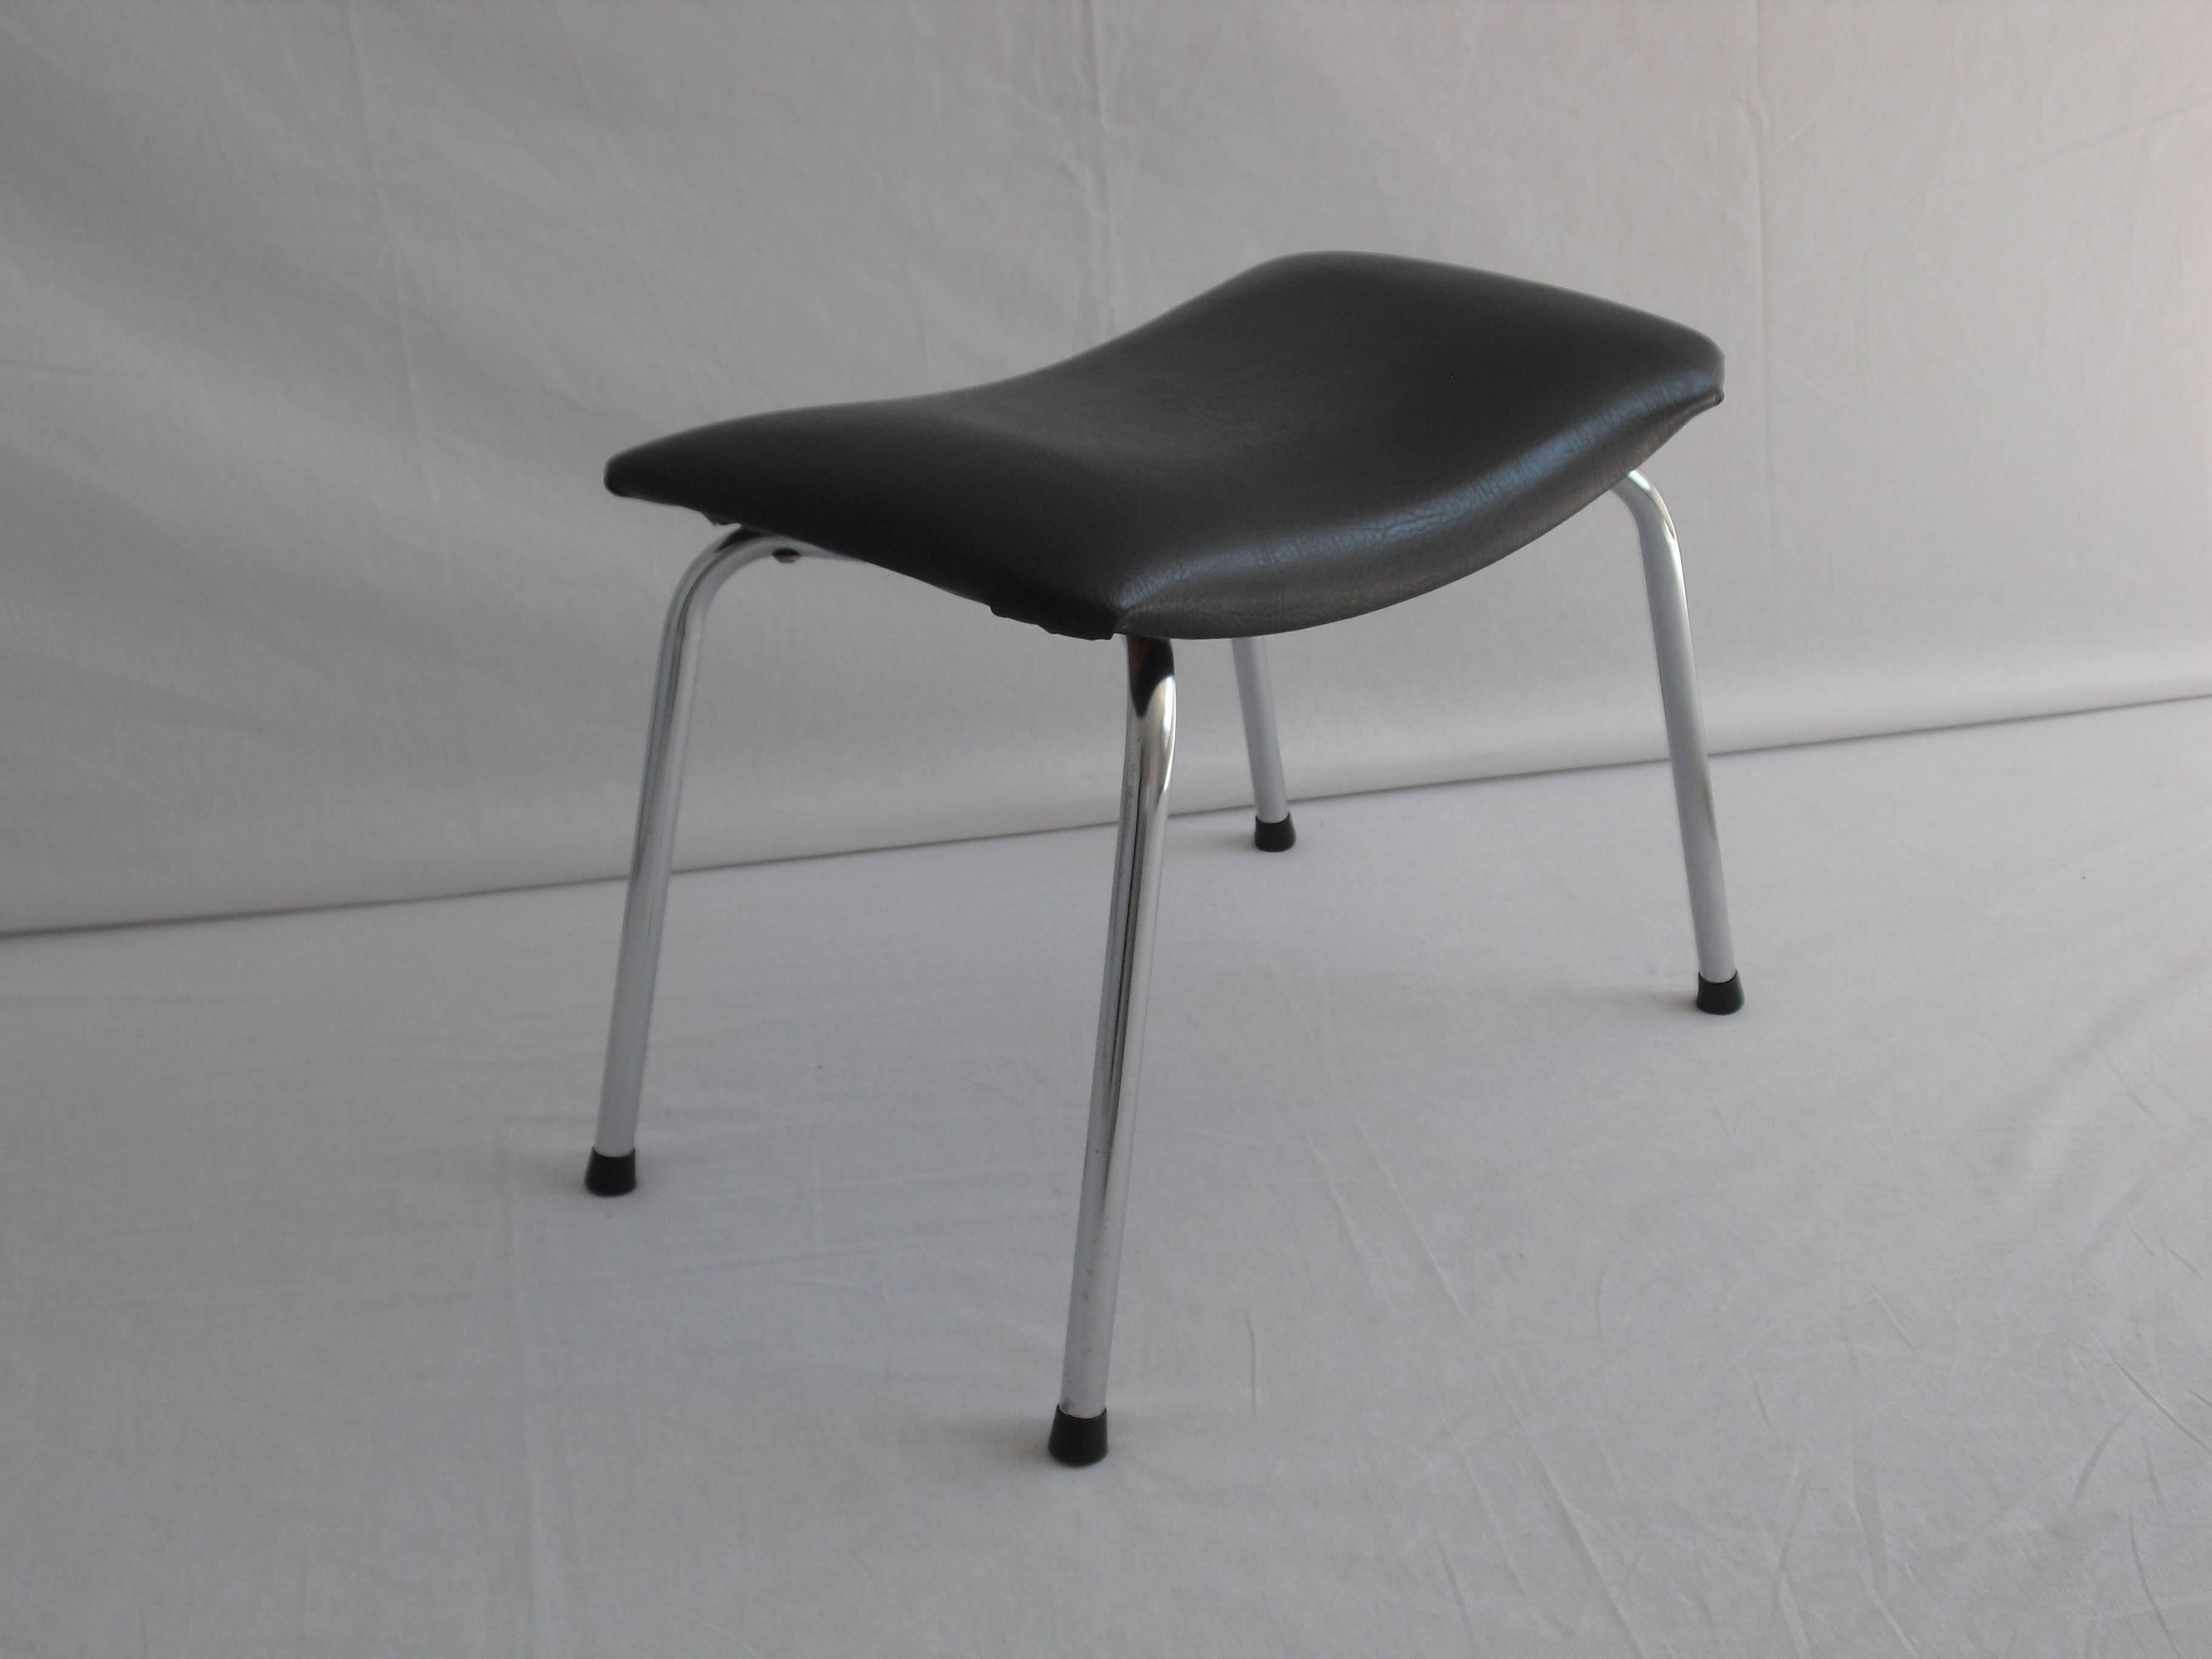 This tubular footstool is made by the Dutch brothers de Wit during the 1950s.
Their company was located in Schiedam and big compatitor from the Gispen company.
Chrome-plated tubular frame and black skai upholstery.